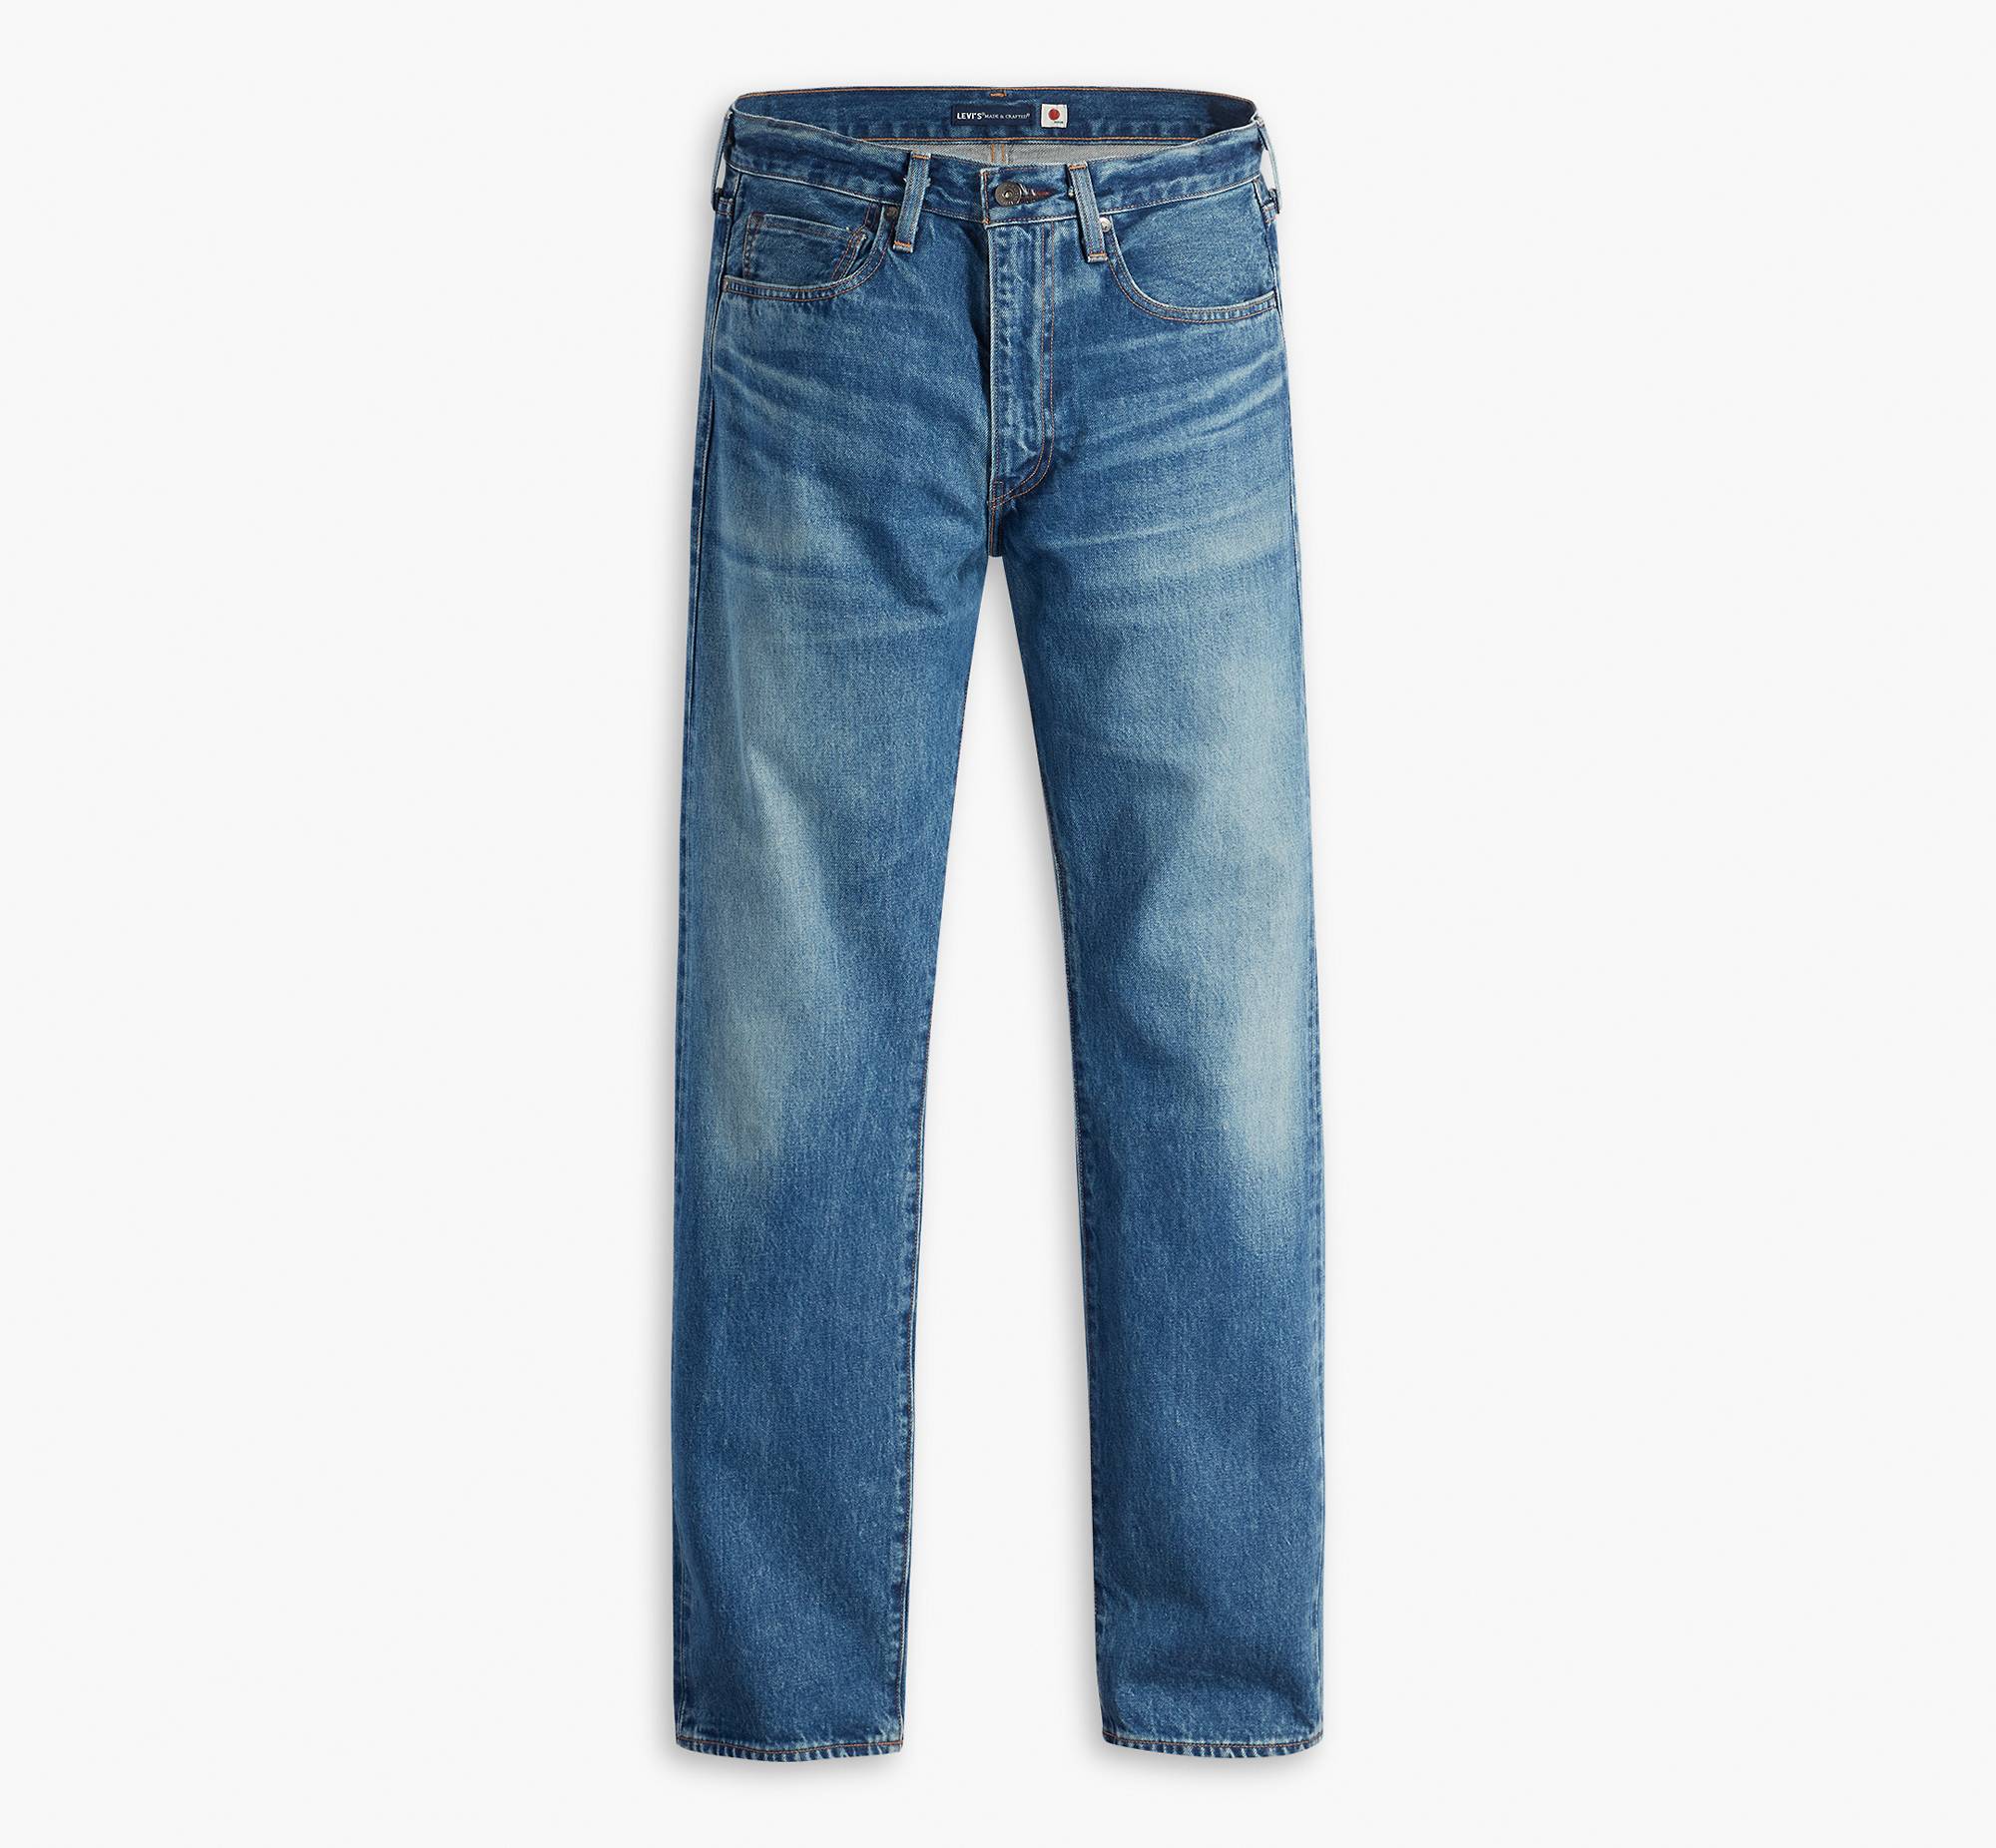 Levi's® Made & Crafted® 505™ Regular Fit Jeans 6